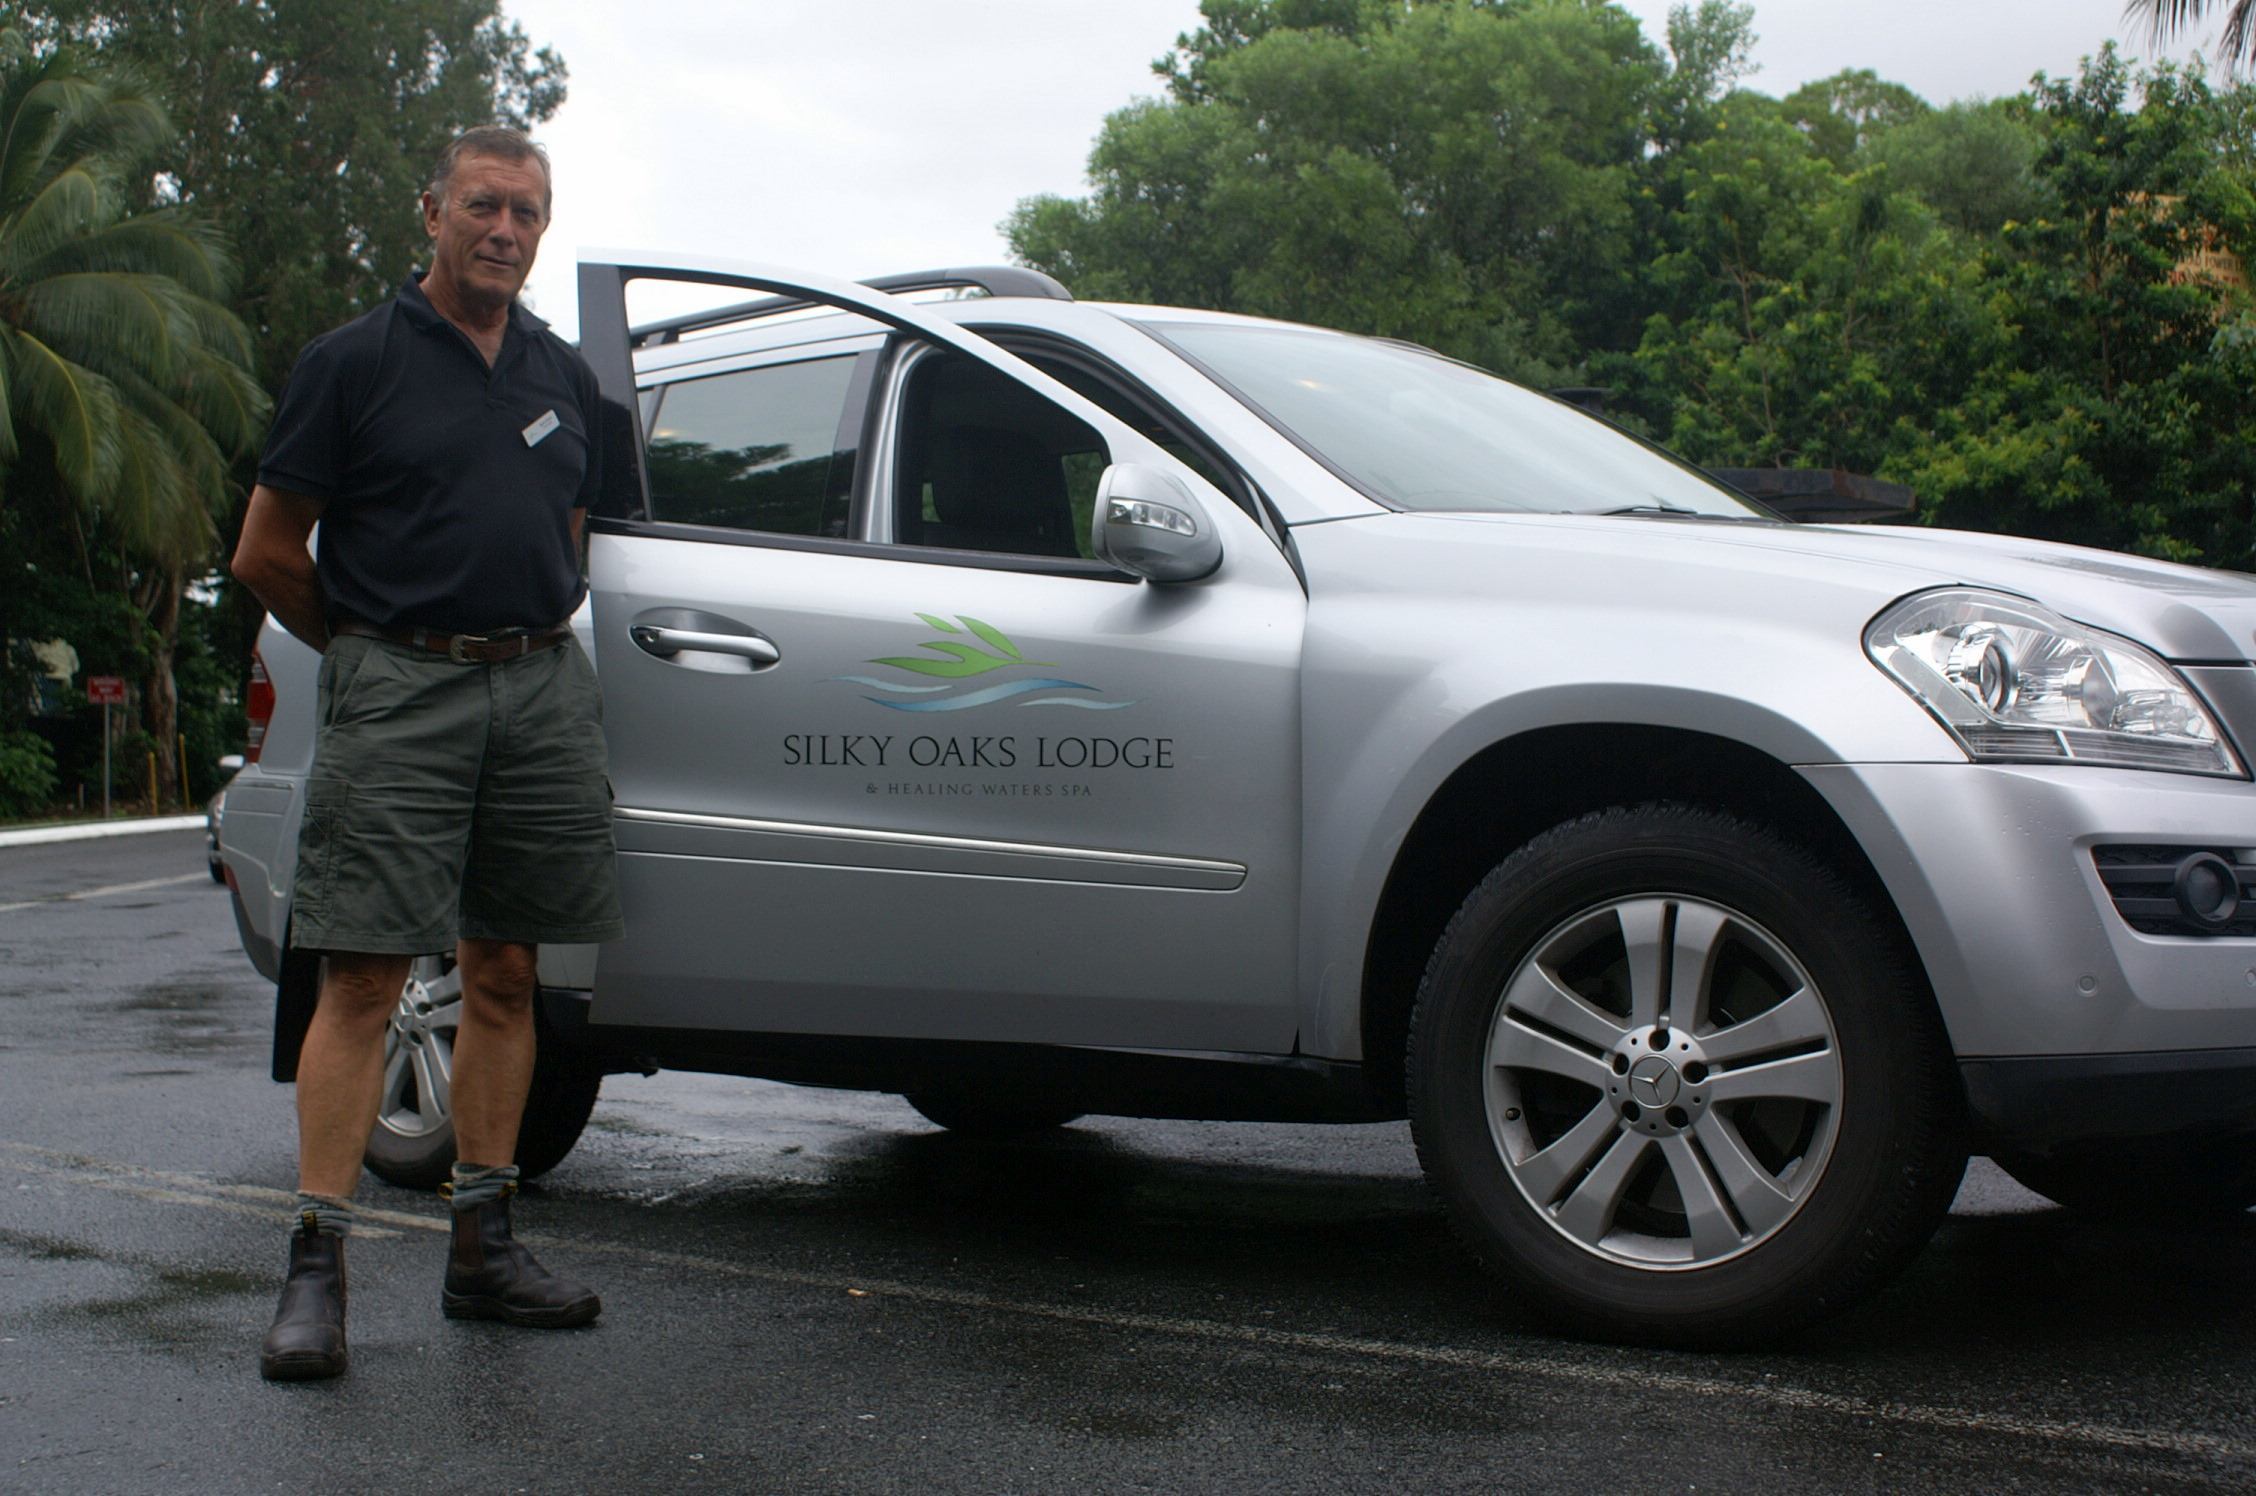 Tour Guide Norm Evans and Silky Oaks Lodge 4x4 Mercedes